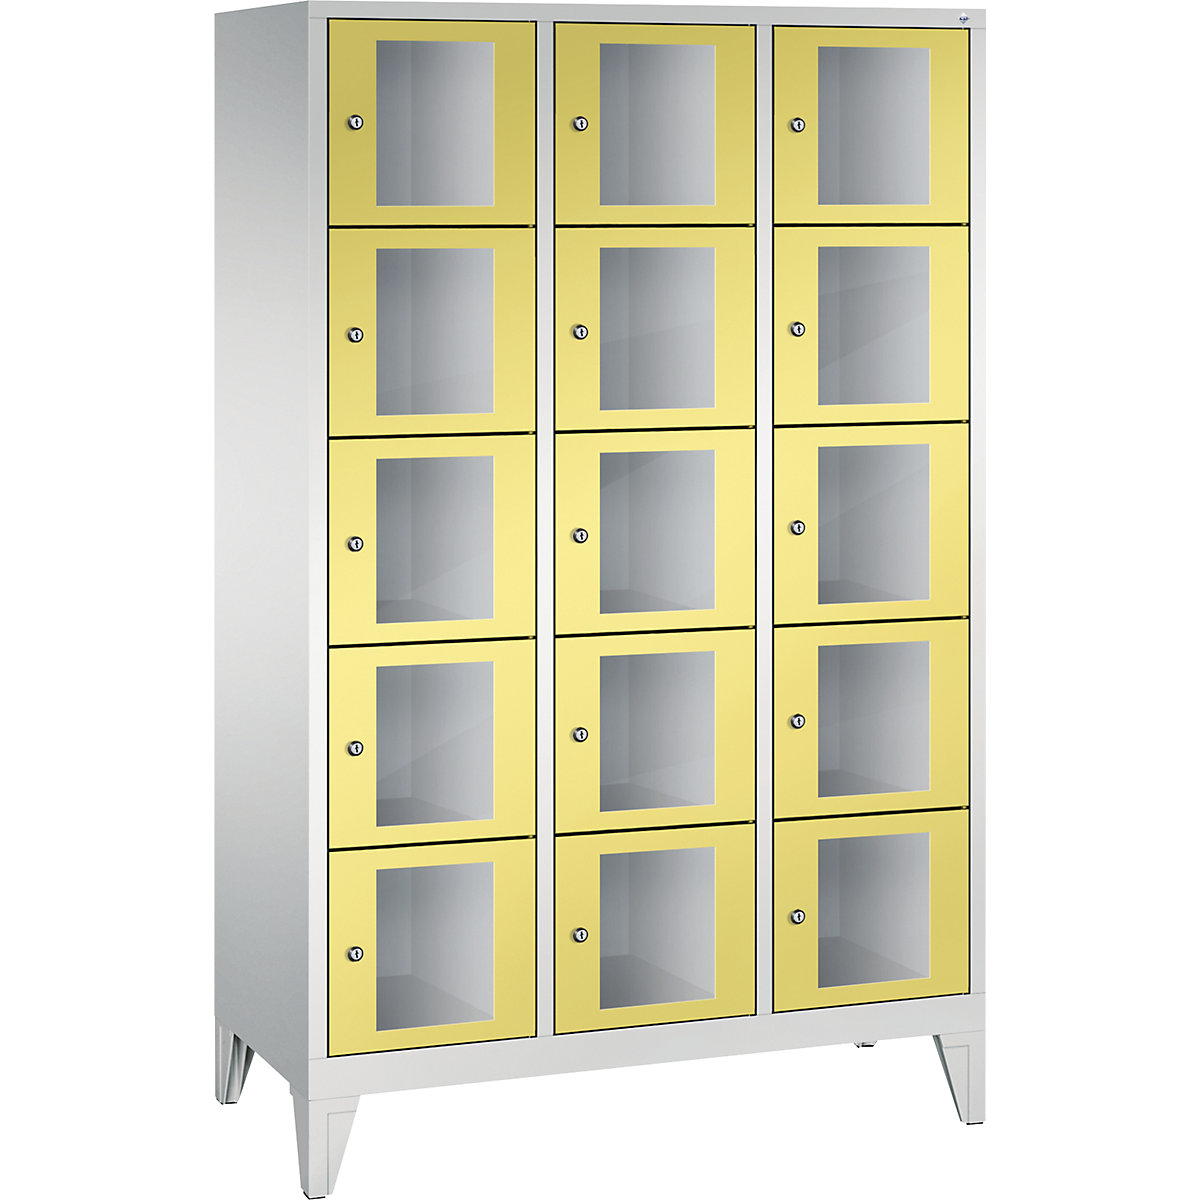 CLASSIC locker unit, compartment height 295 mm, with feet – C+P, 15 compartments, width 1200 mm, sulphur yellow door